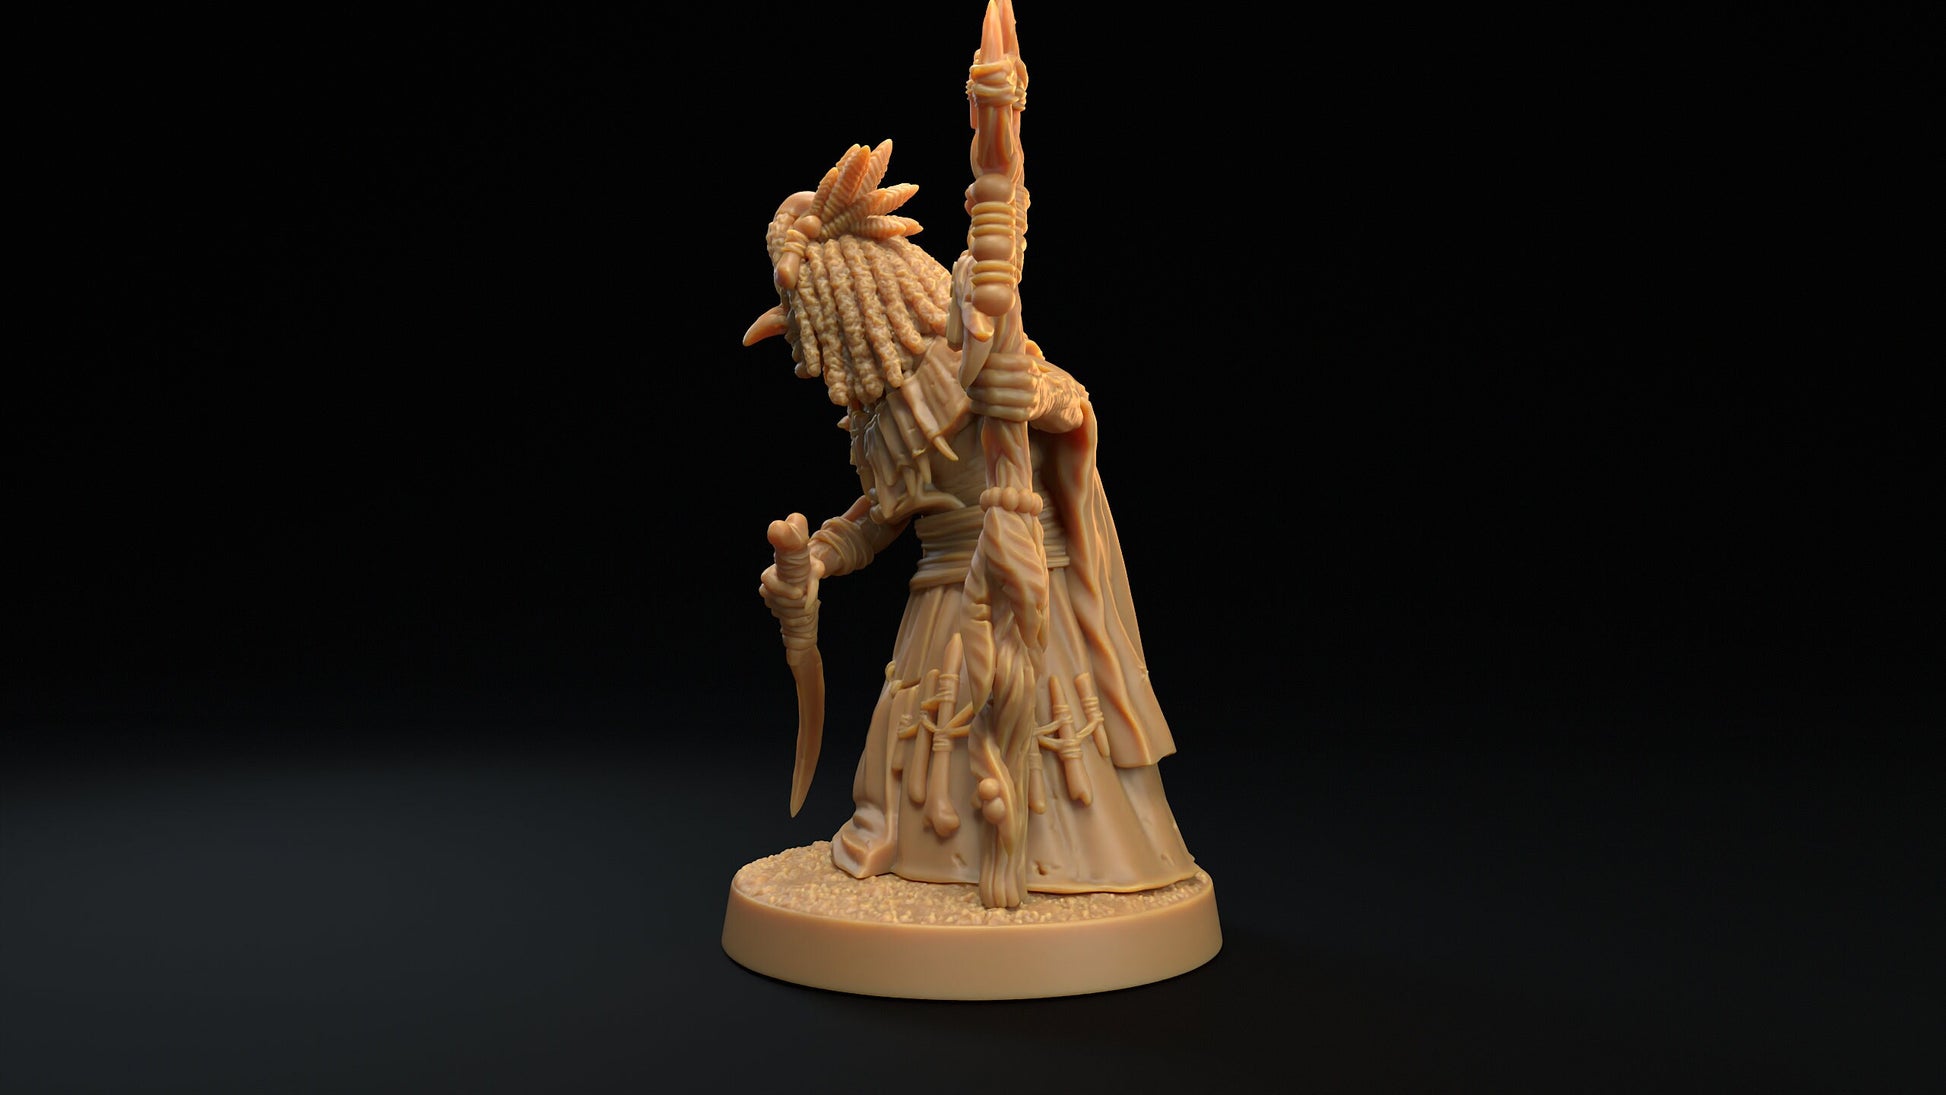 Swamp Hags | RPG Miniature for Dungeons and Dragons|Pathfinder|Tabletop Wargaming | Fey Miniature | Dragon Trappers Lodge